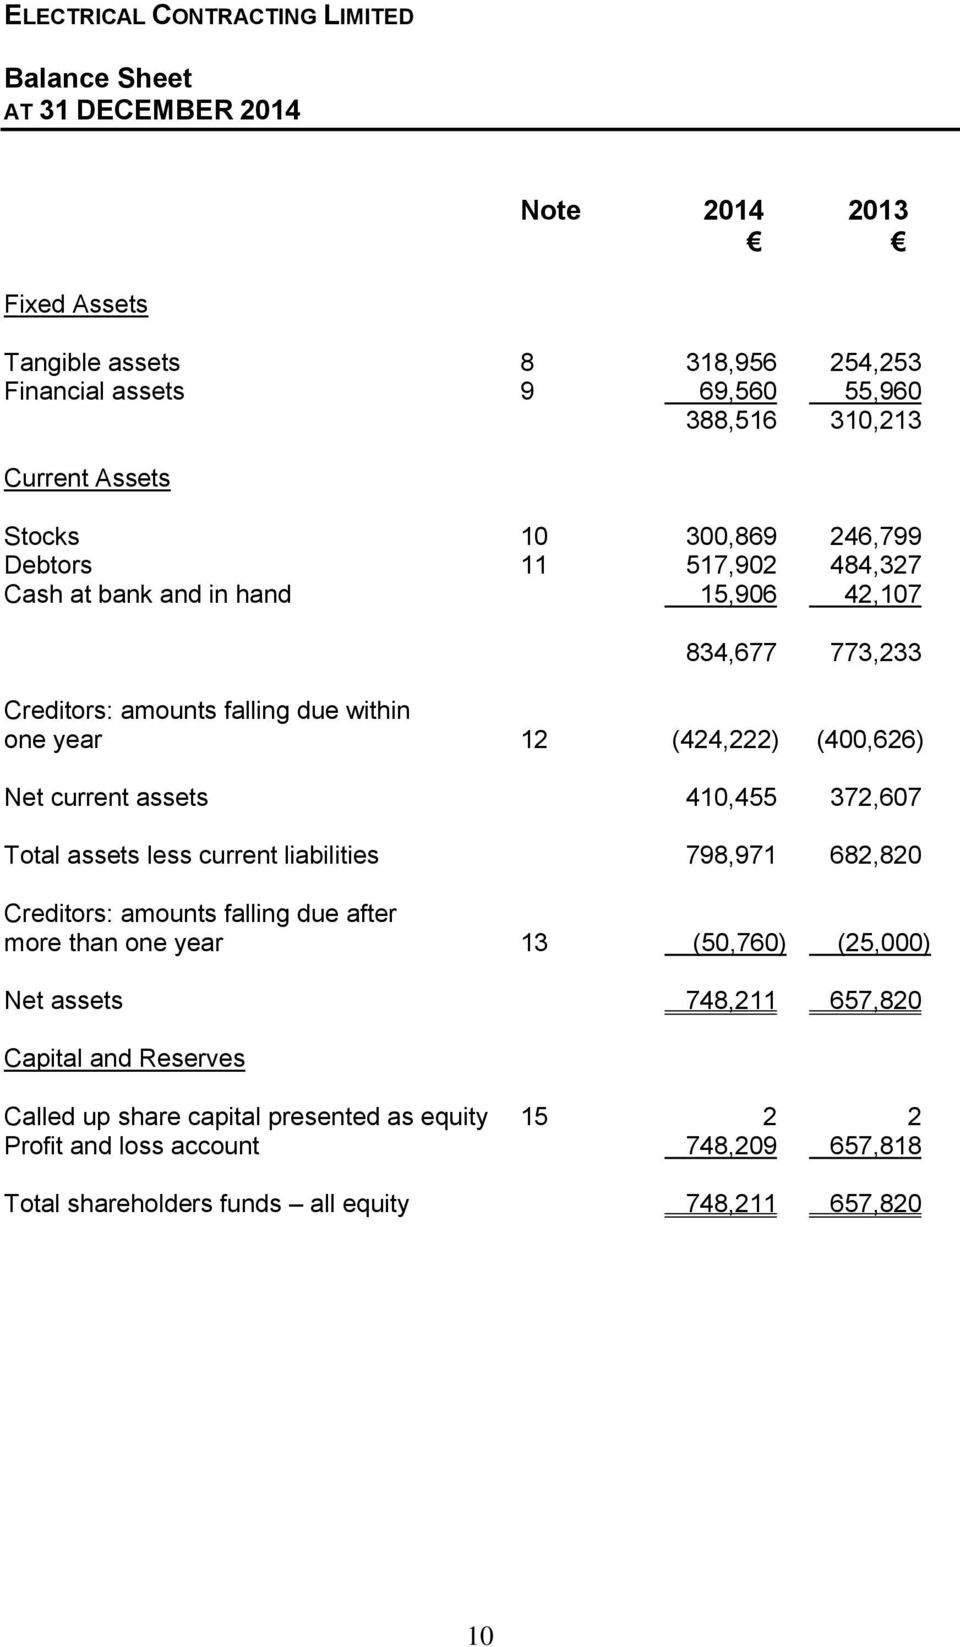 assets 410,455 372,607 Total assets less current liabilities 798,971 682,820 Creditors: amounts falling due after more than one year 13 (50,760) (25,000) Net assets